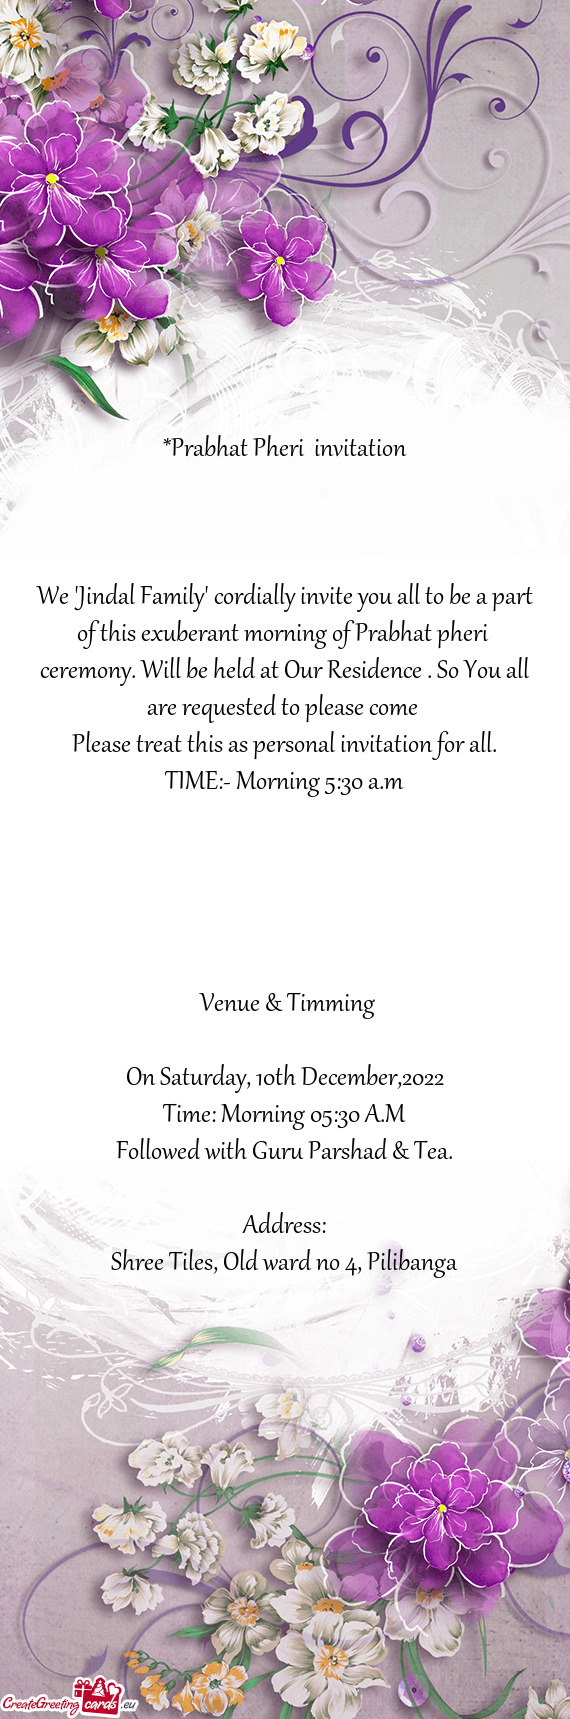 We "Jindal Family" cordially invite you all to be a part of this exuberant morning of Prabhat pheri